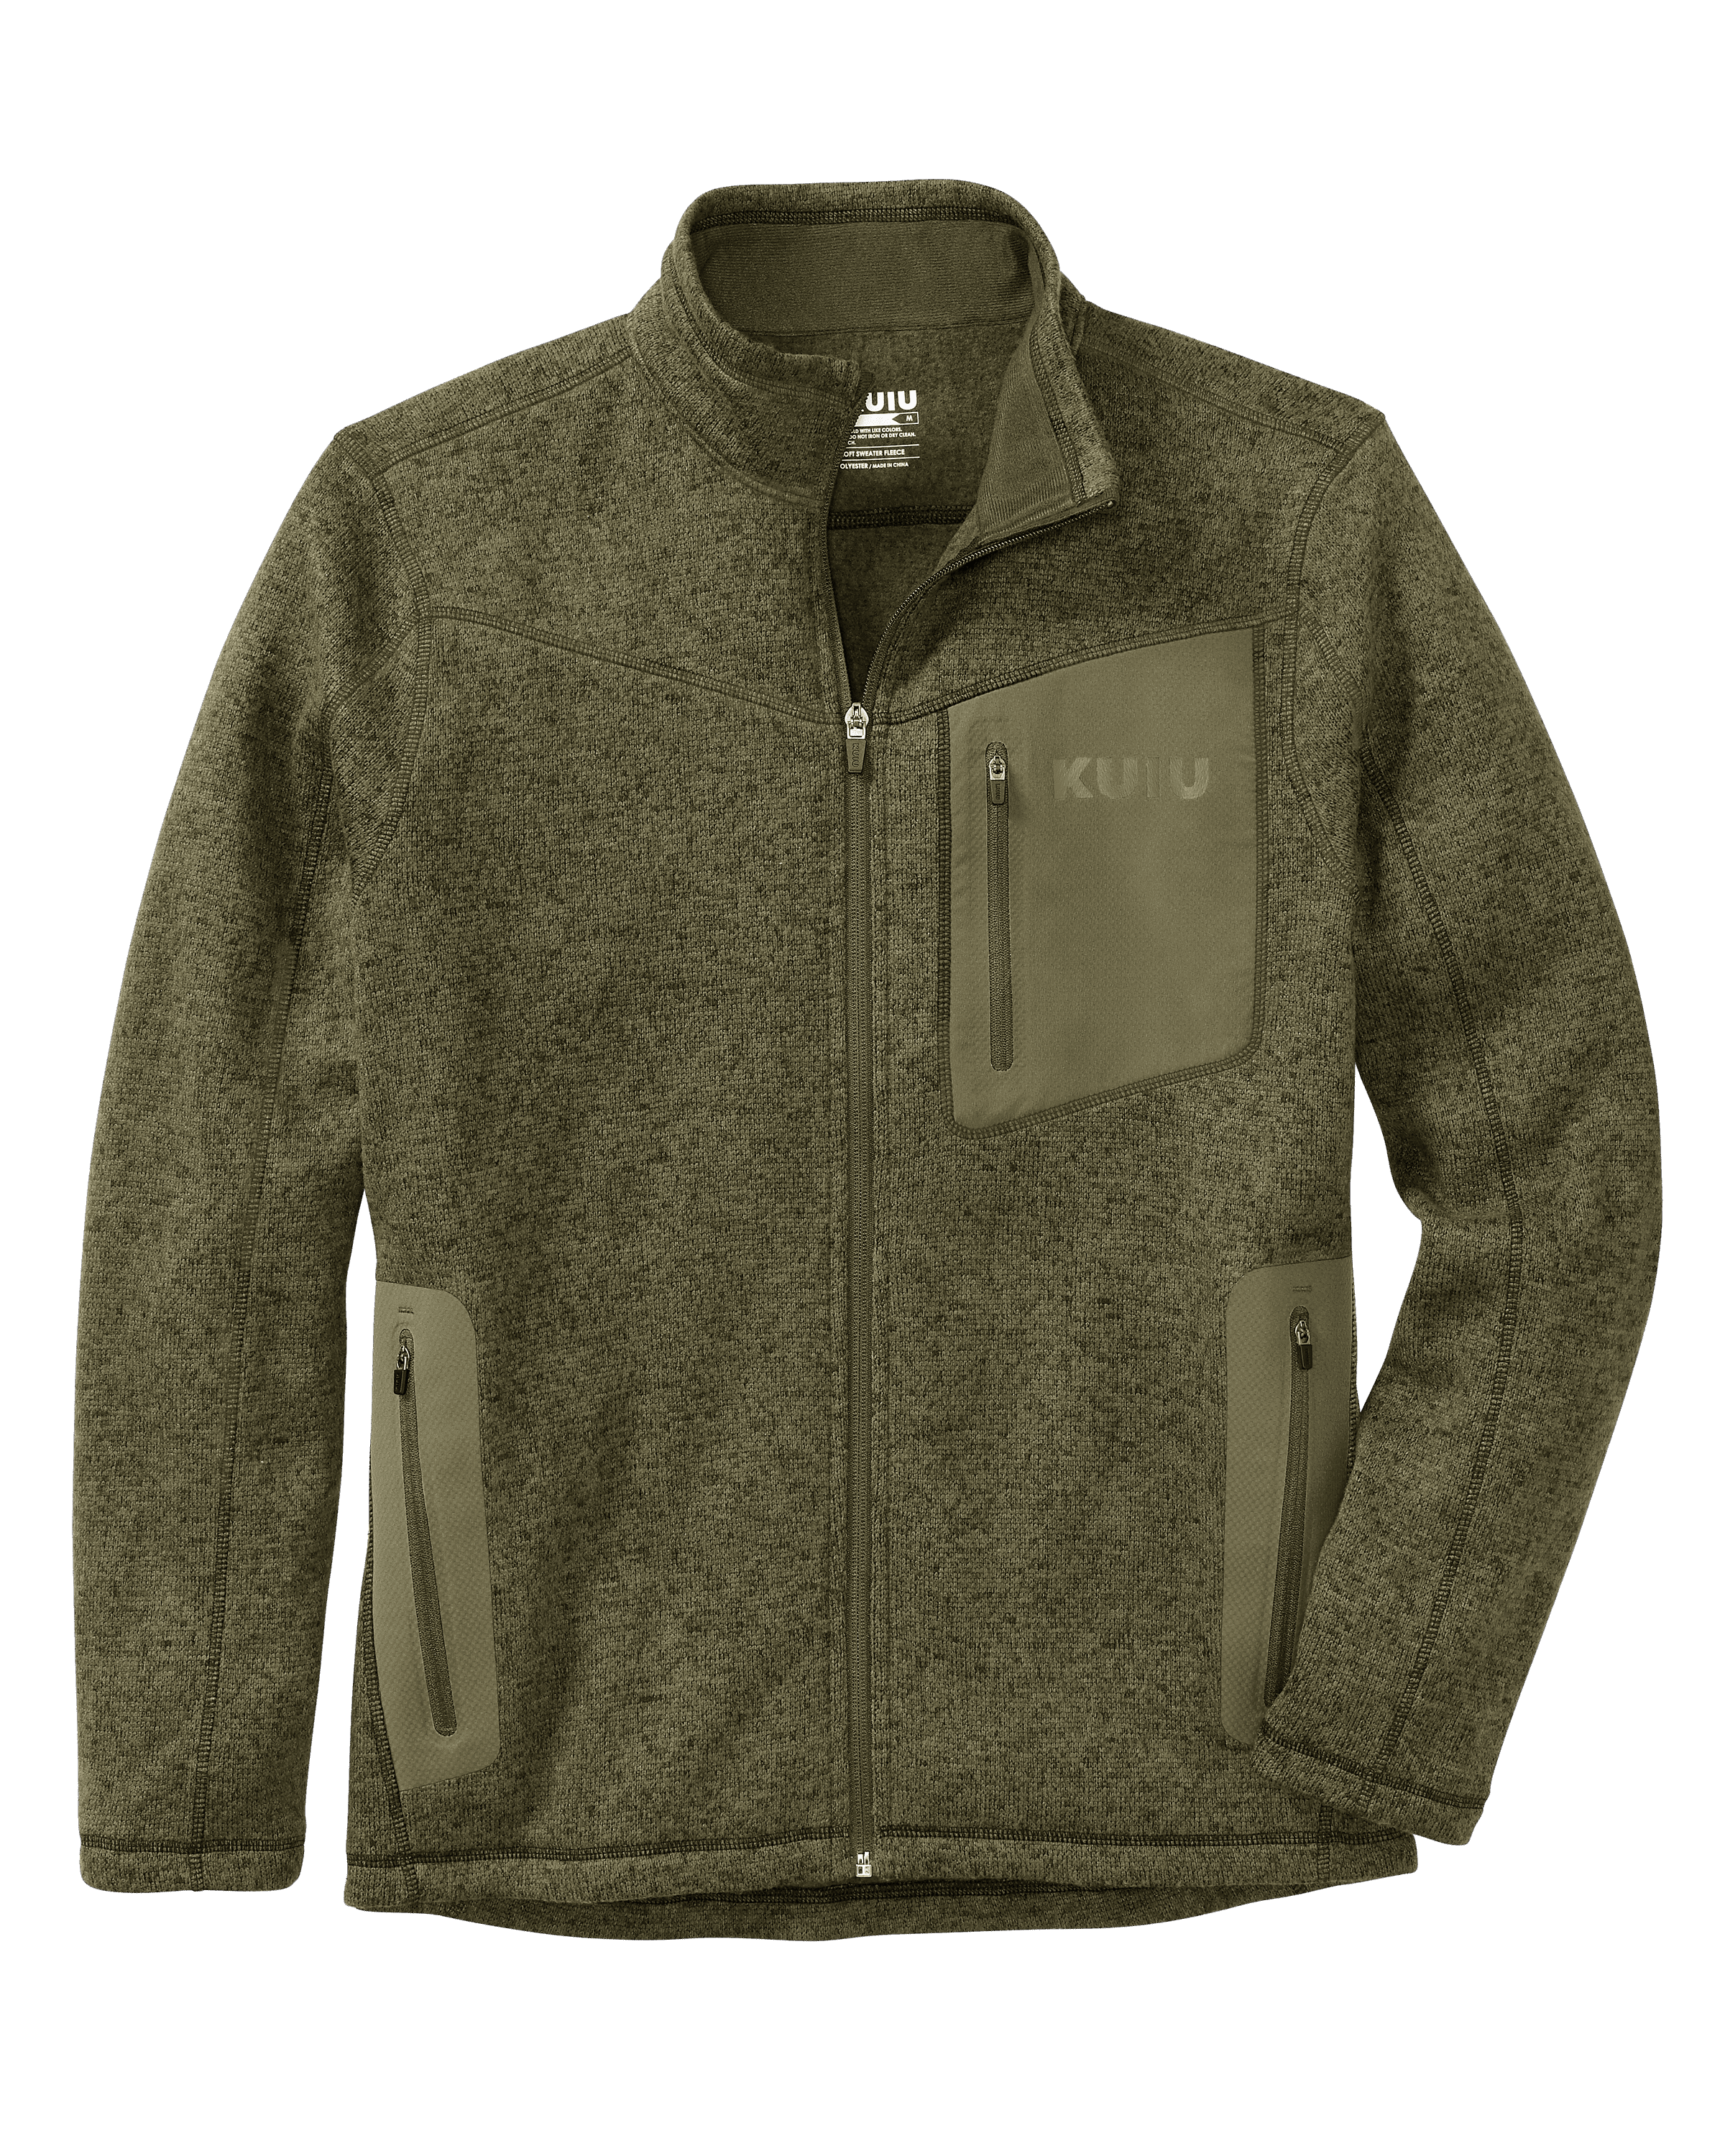 KUIU Outlet Base Camp Full Zip Sweater in Olive | Size 3XL